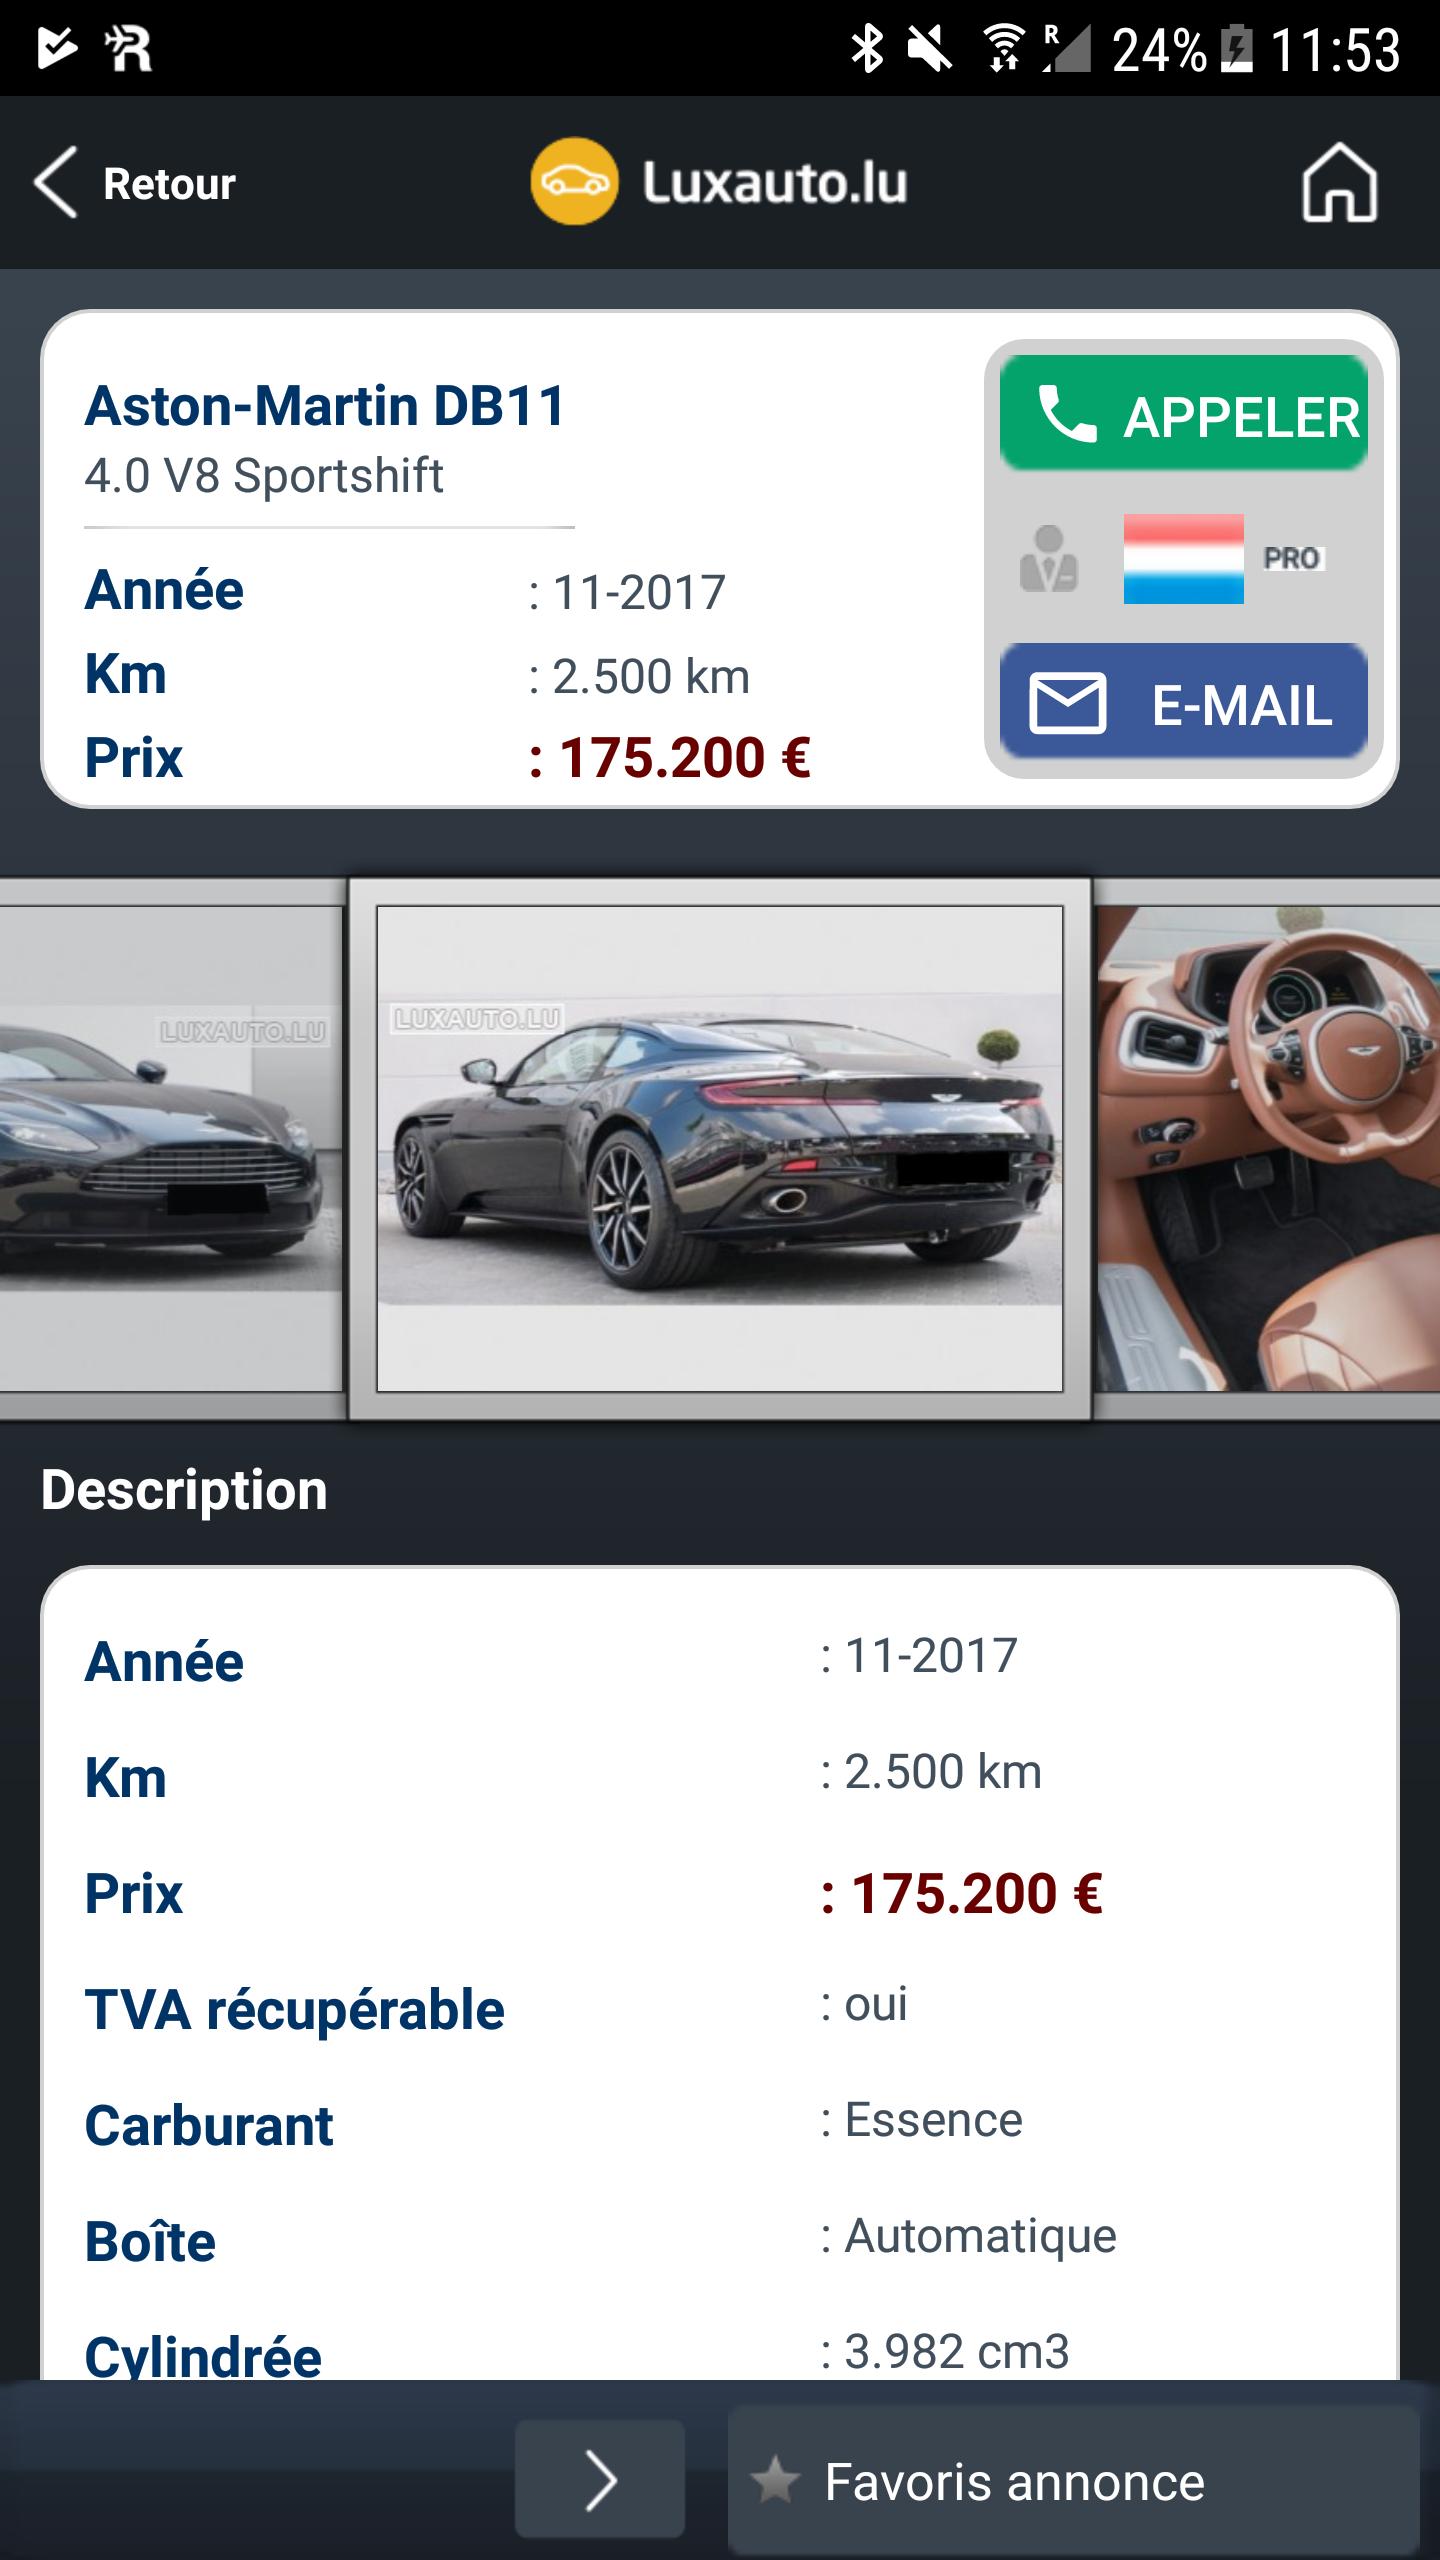 Luxauto for Android - APK Download